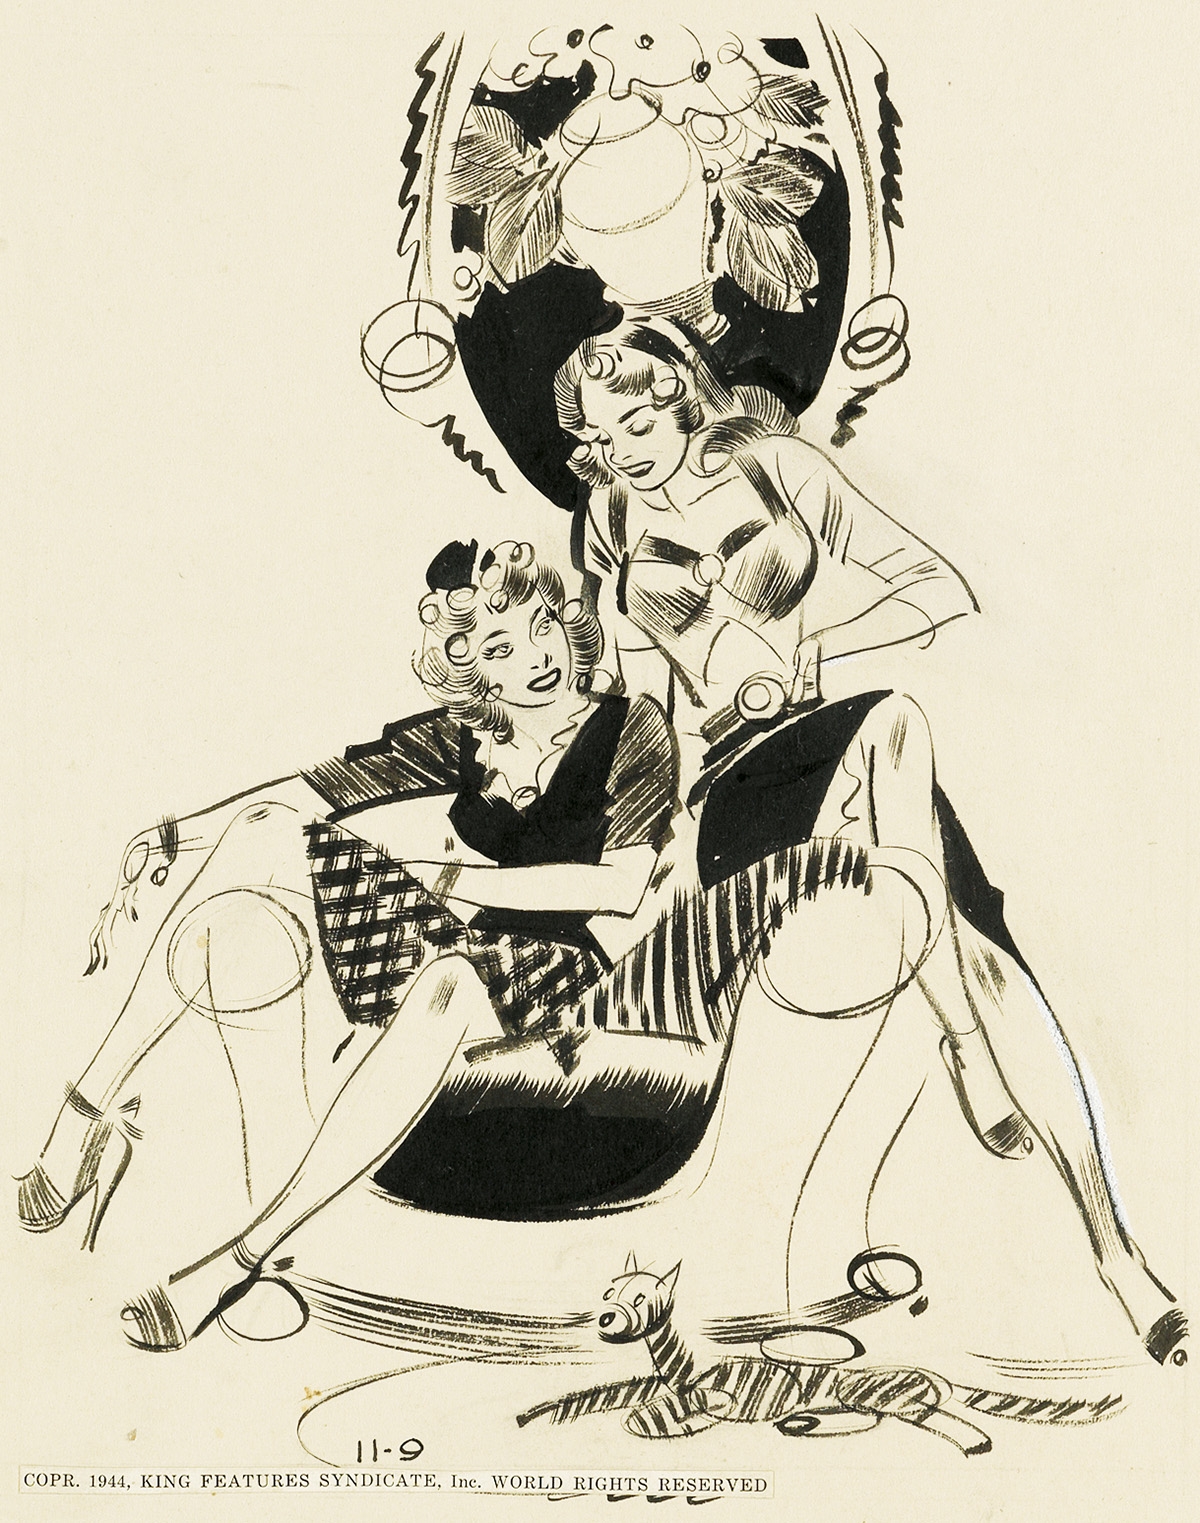 "At first I felt like a sister toward him, but when he kissed me ---! Oh, brother!" Original daily "Pin-Up Girls" cartoon, published by King Features Syndicate, November 11, 1944